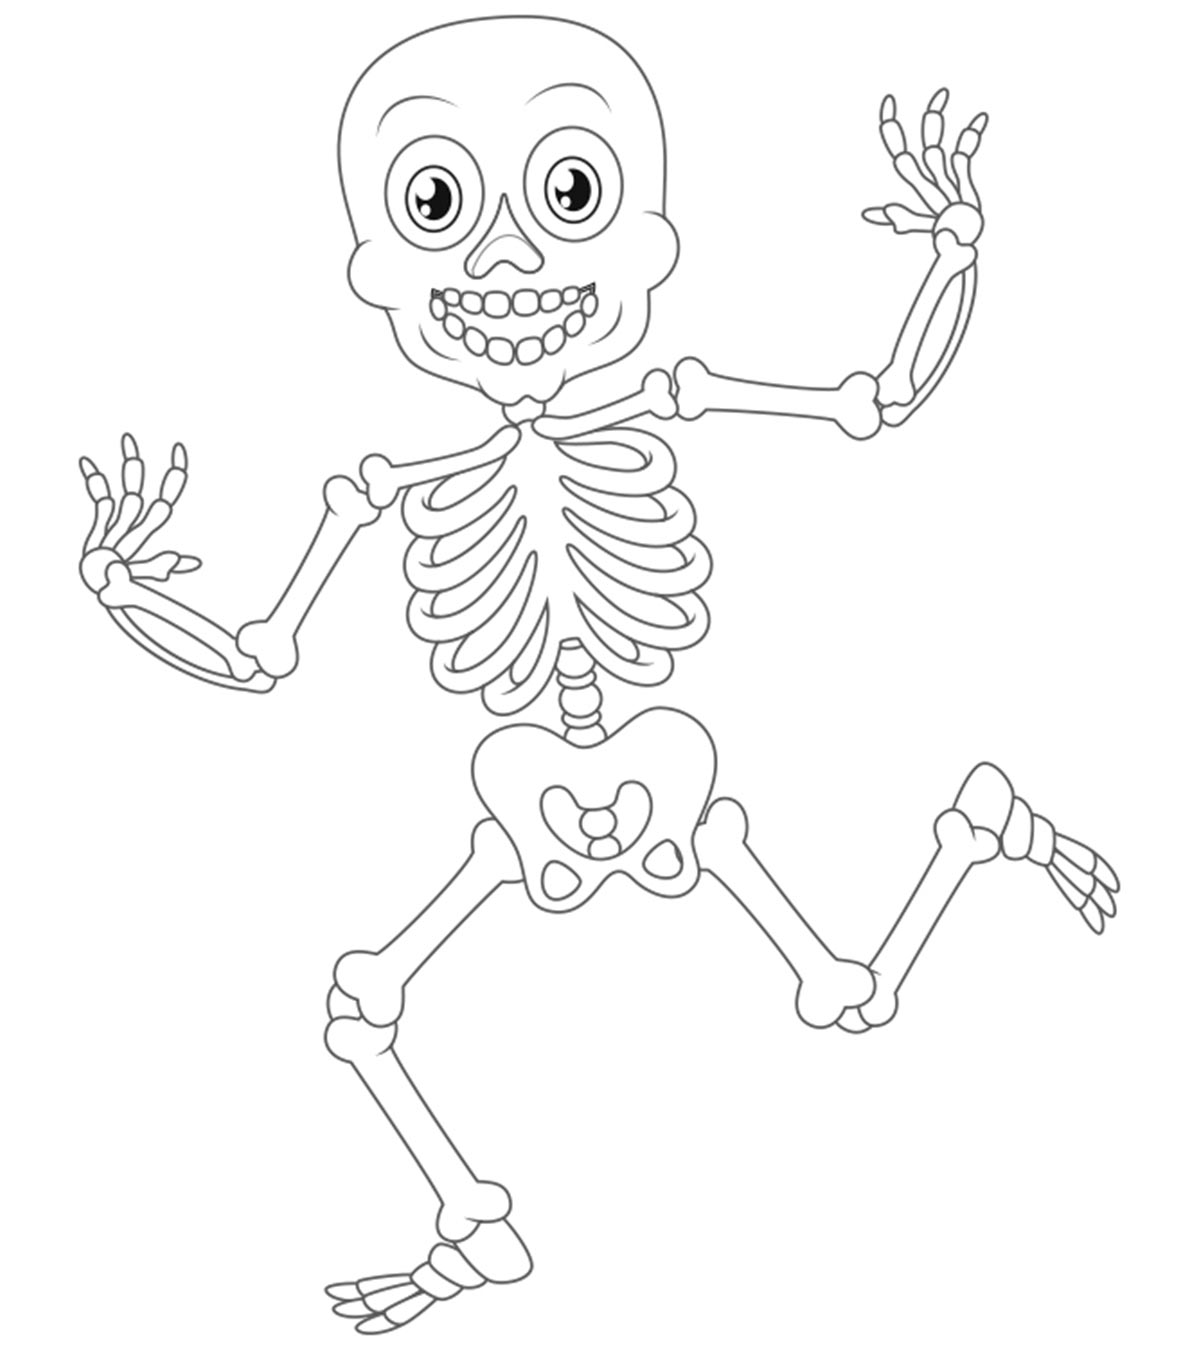 Skeleton Coloring Pages To Print Sketch Coloring Page